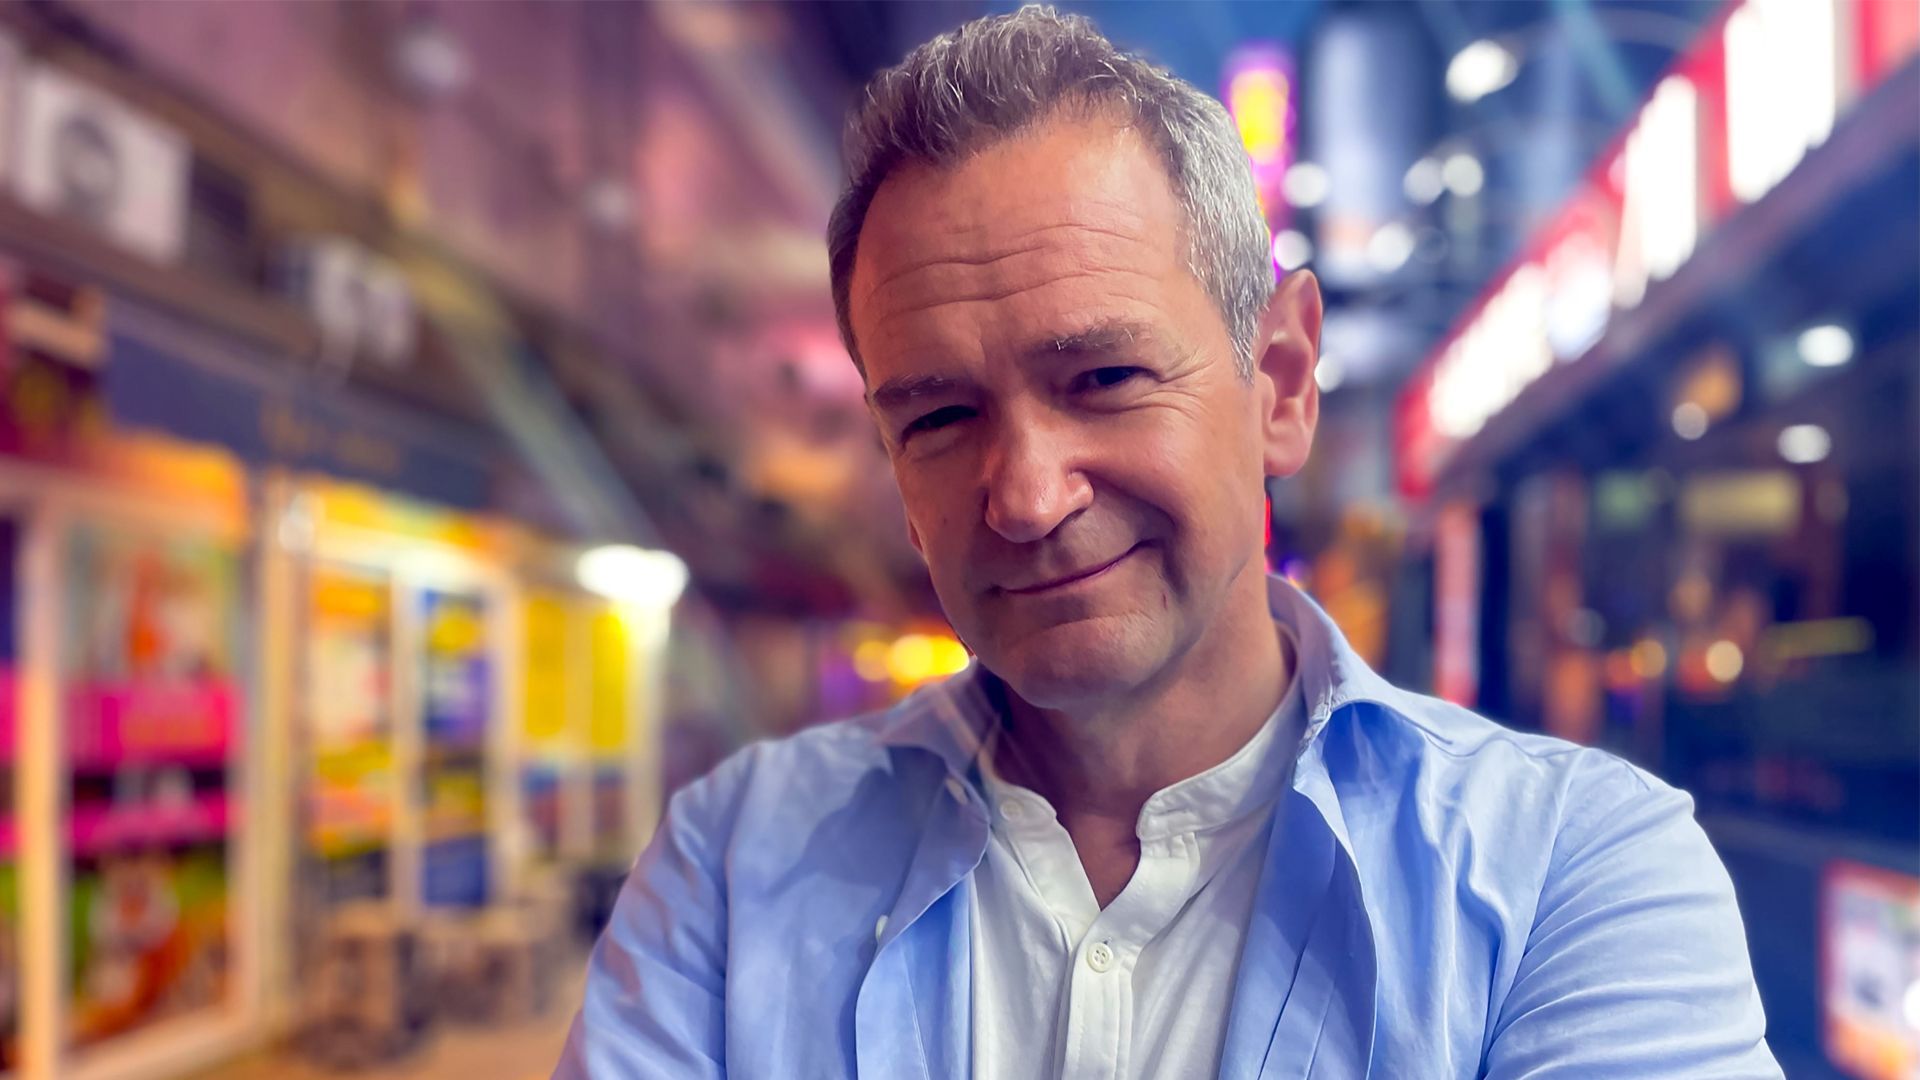 Alexander Armstrong in South Korea background